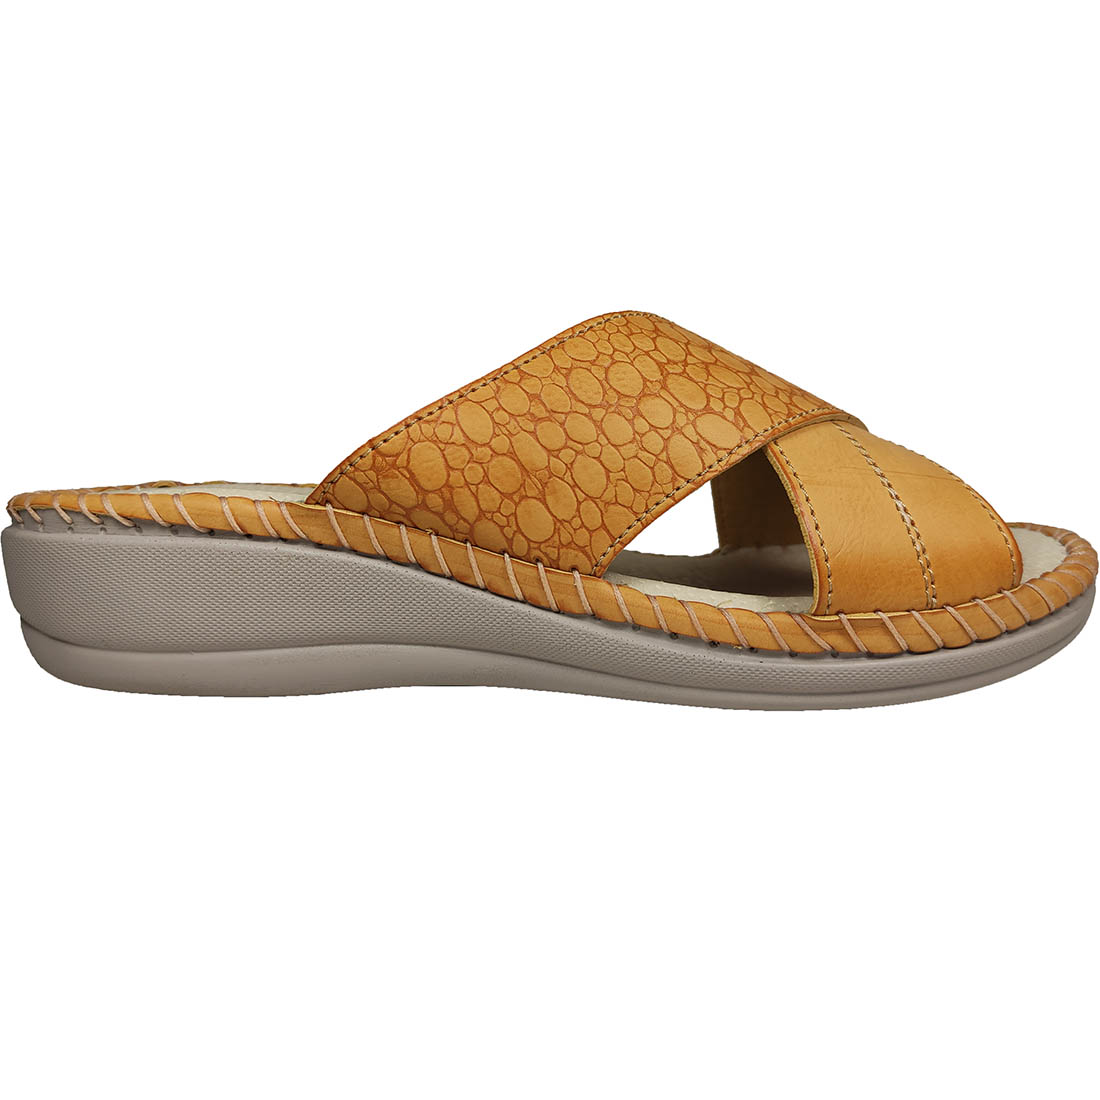  Anatomical Leather Slippers Fild IRIS-2105 Camel